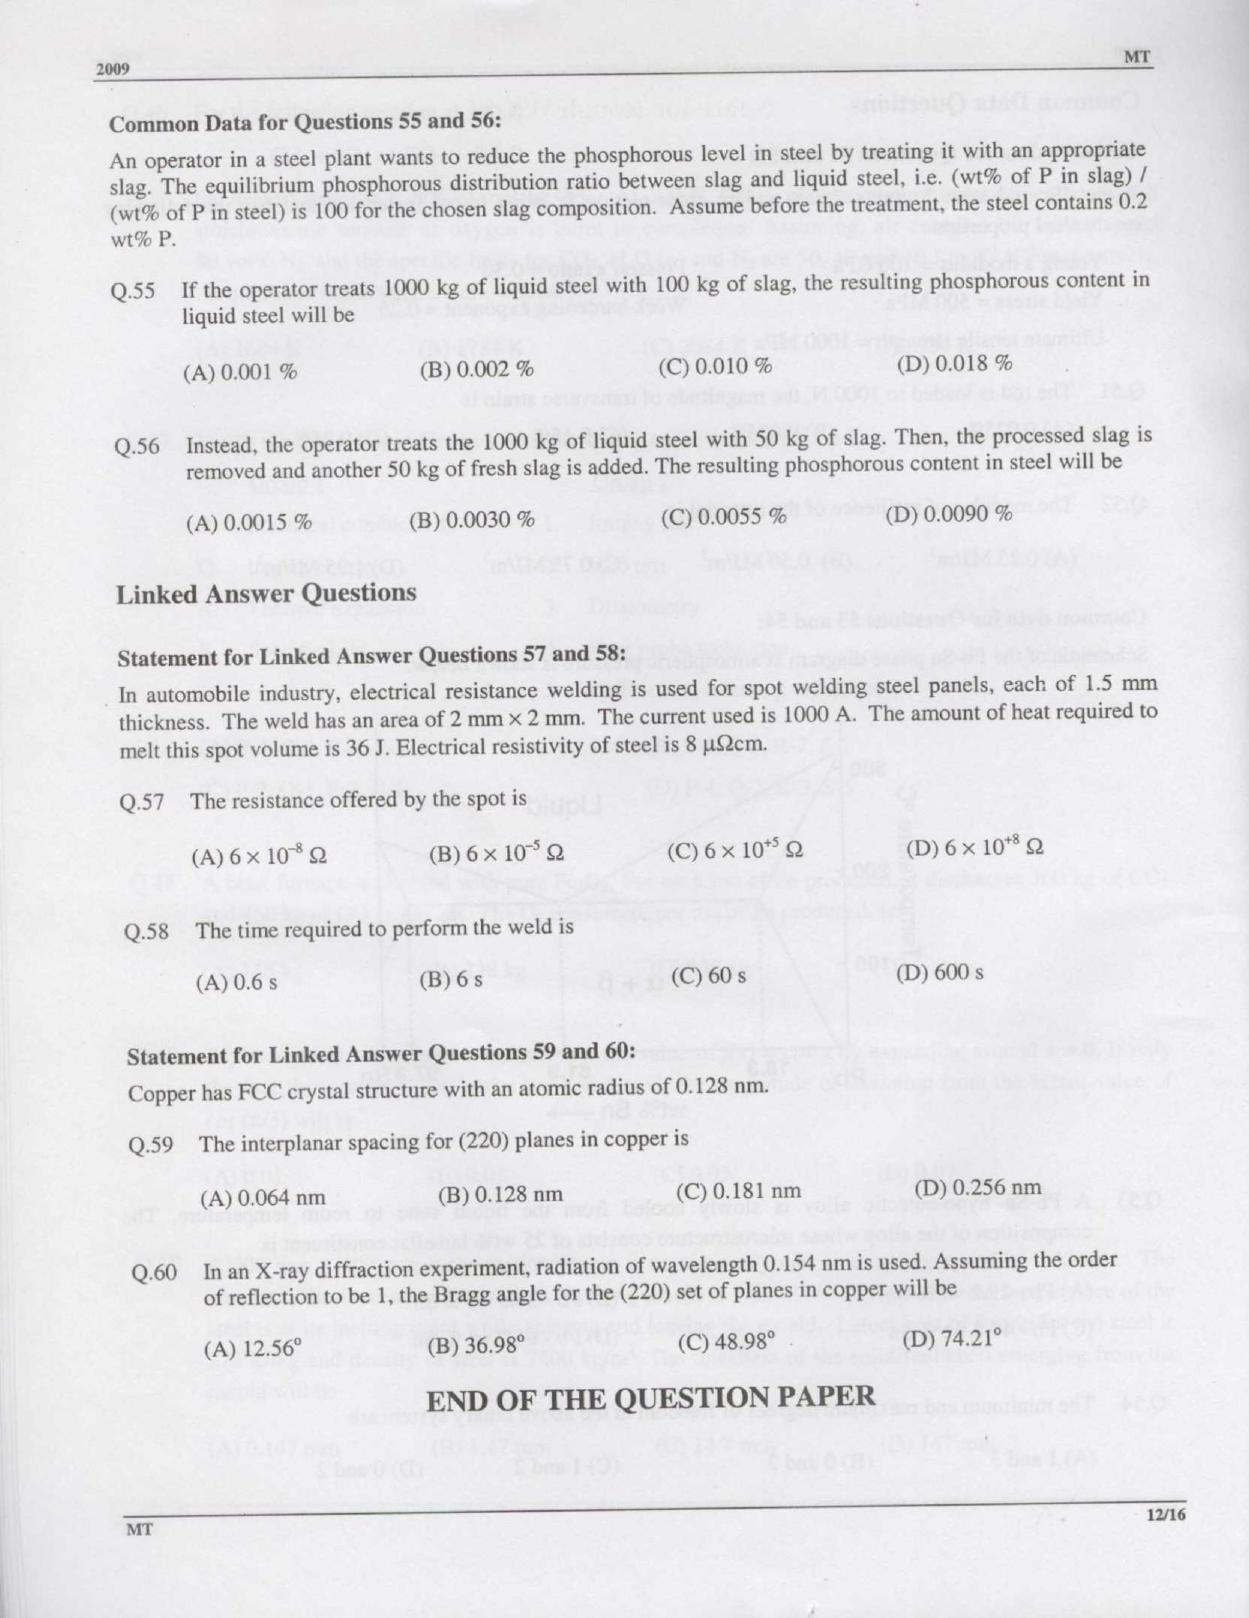 GATE 2009 Metallurgical Engineering (MT) Question Paper with Answer Key - Page 12